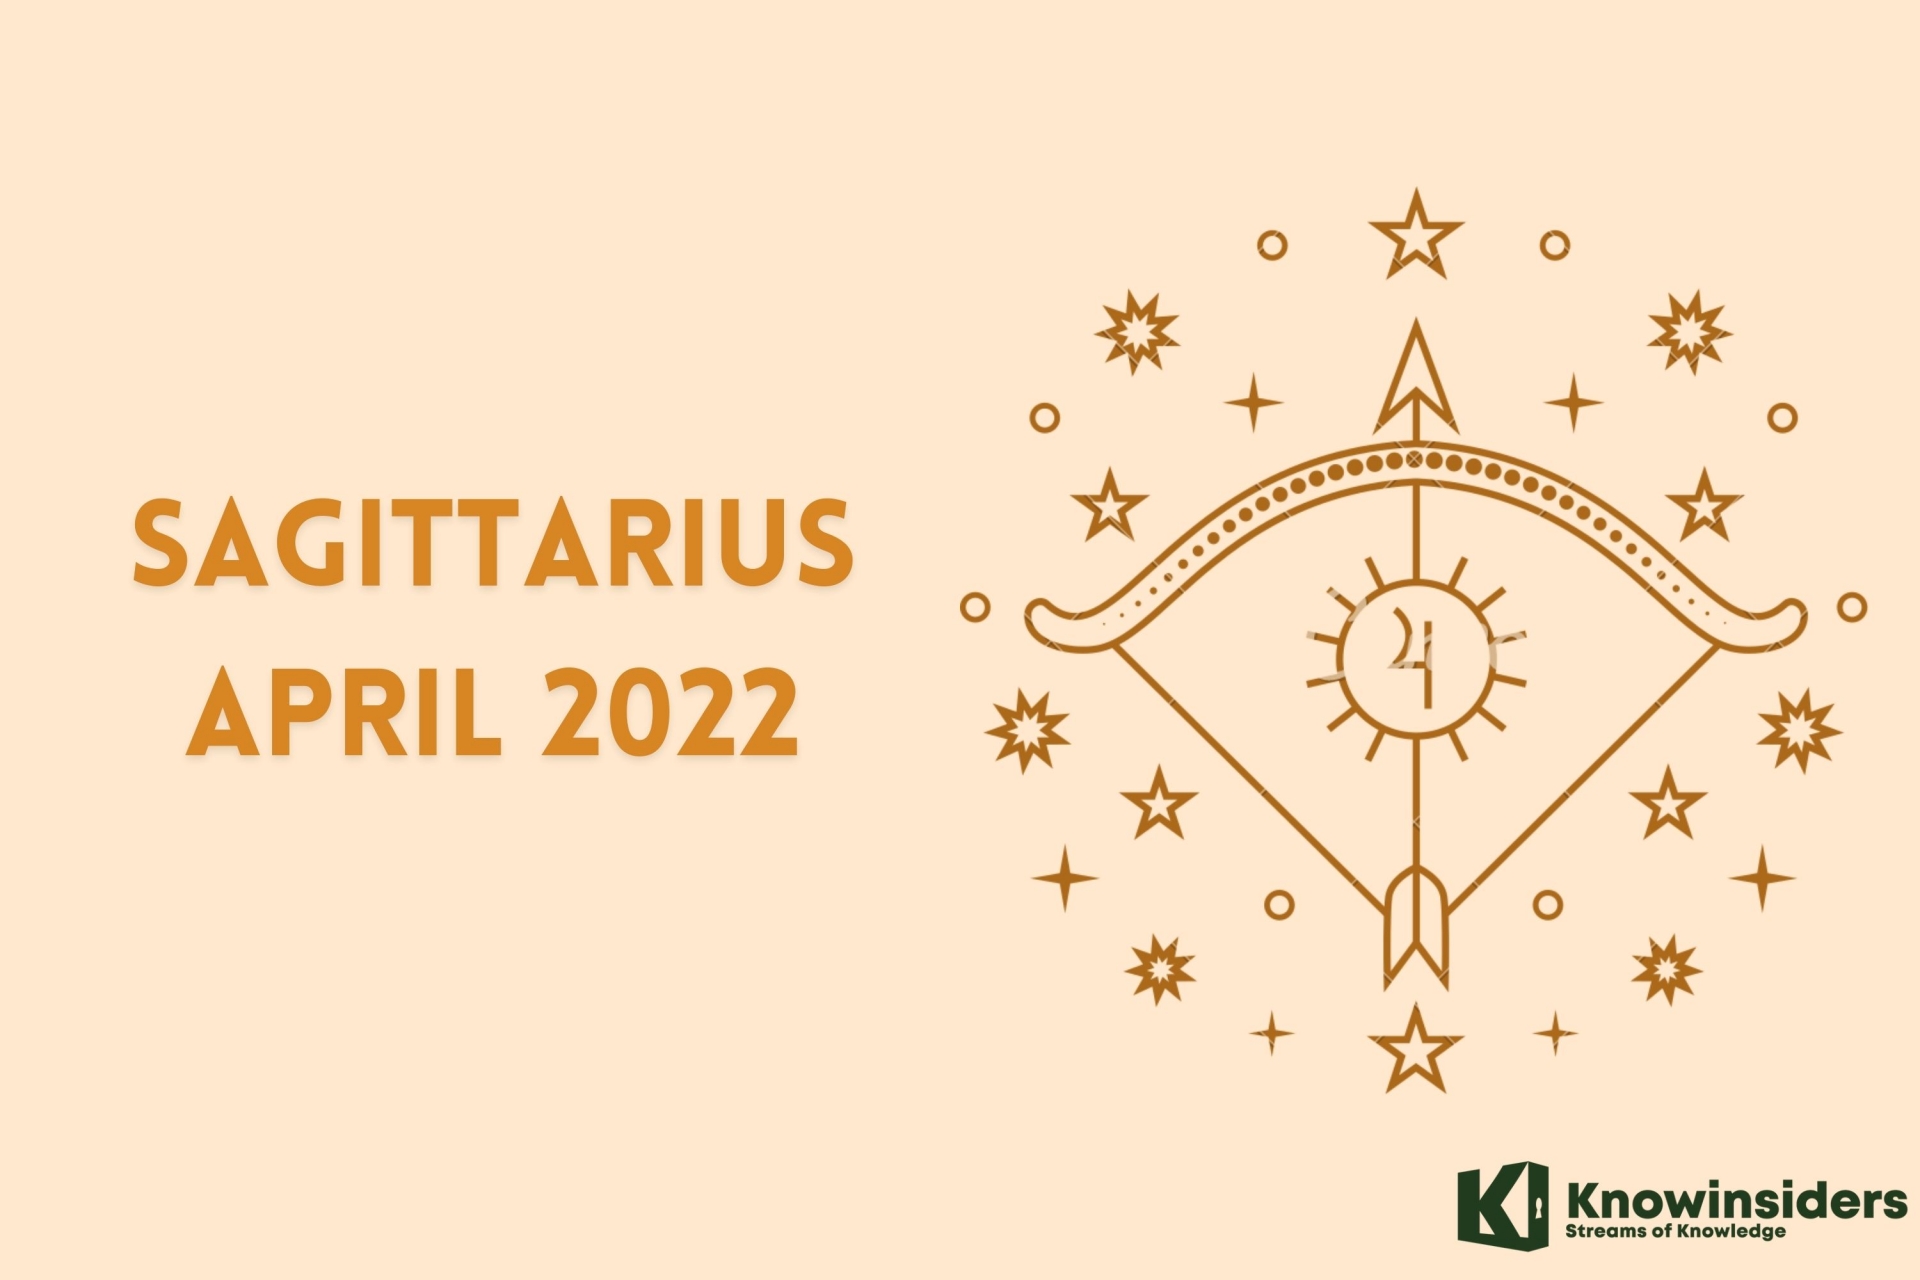 SAGITTARIUS April 2022 Horoscope: Monthly Prediction for Love, Career, Money and Health